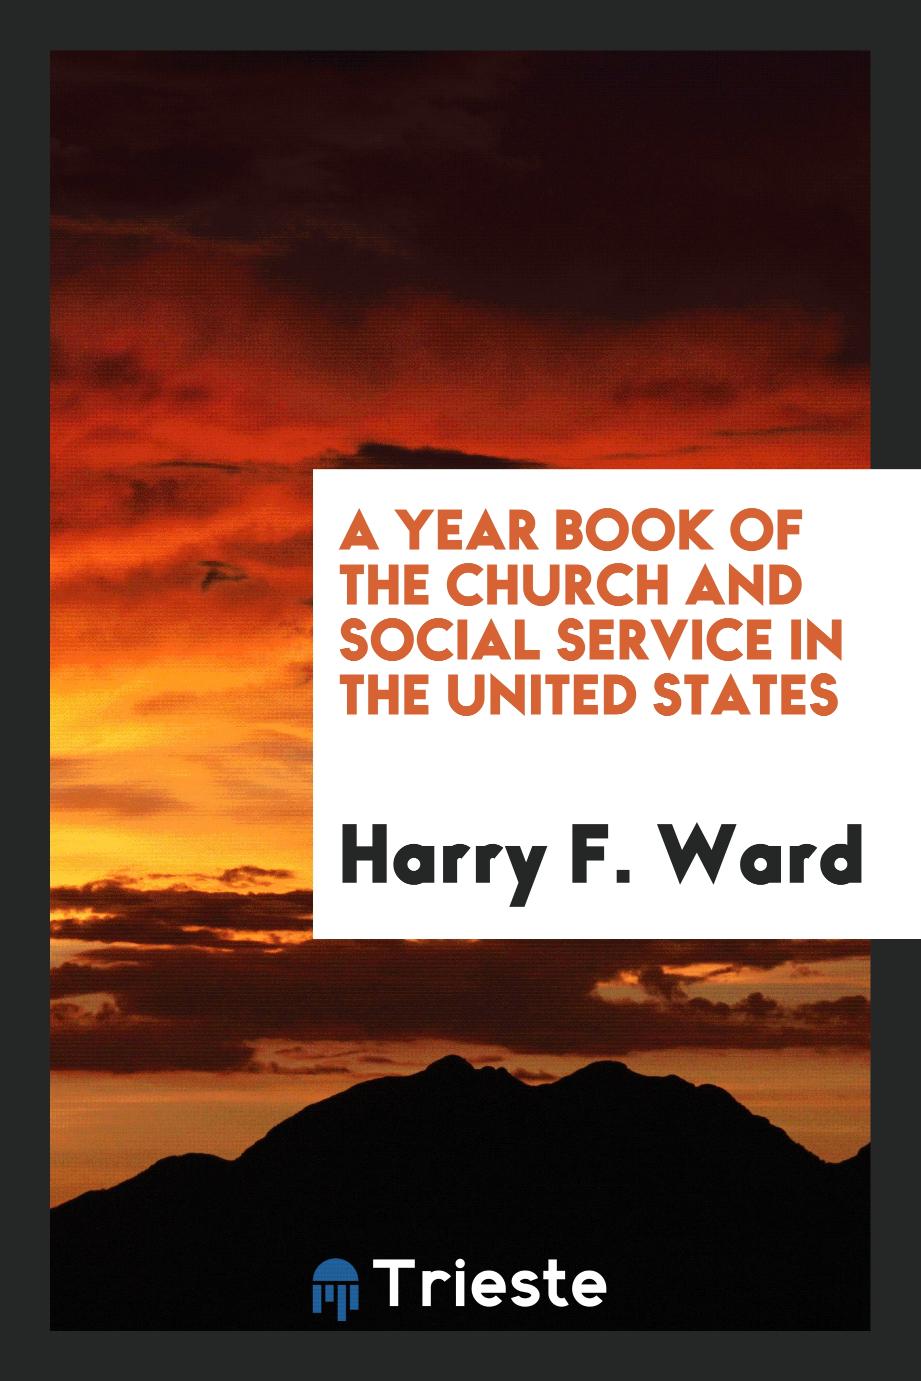 A year book of the church and social service in the United States